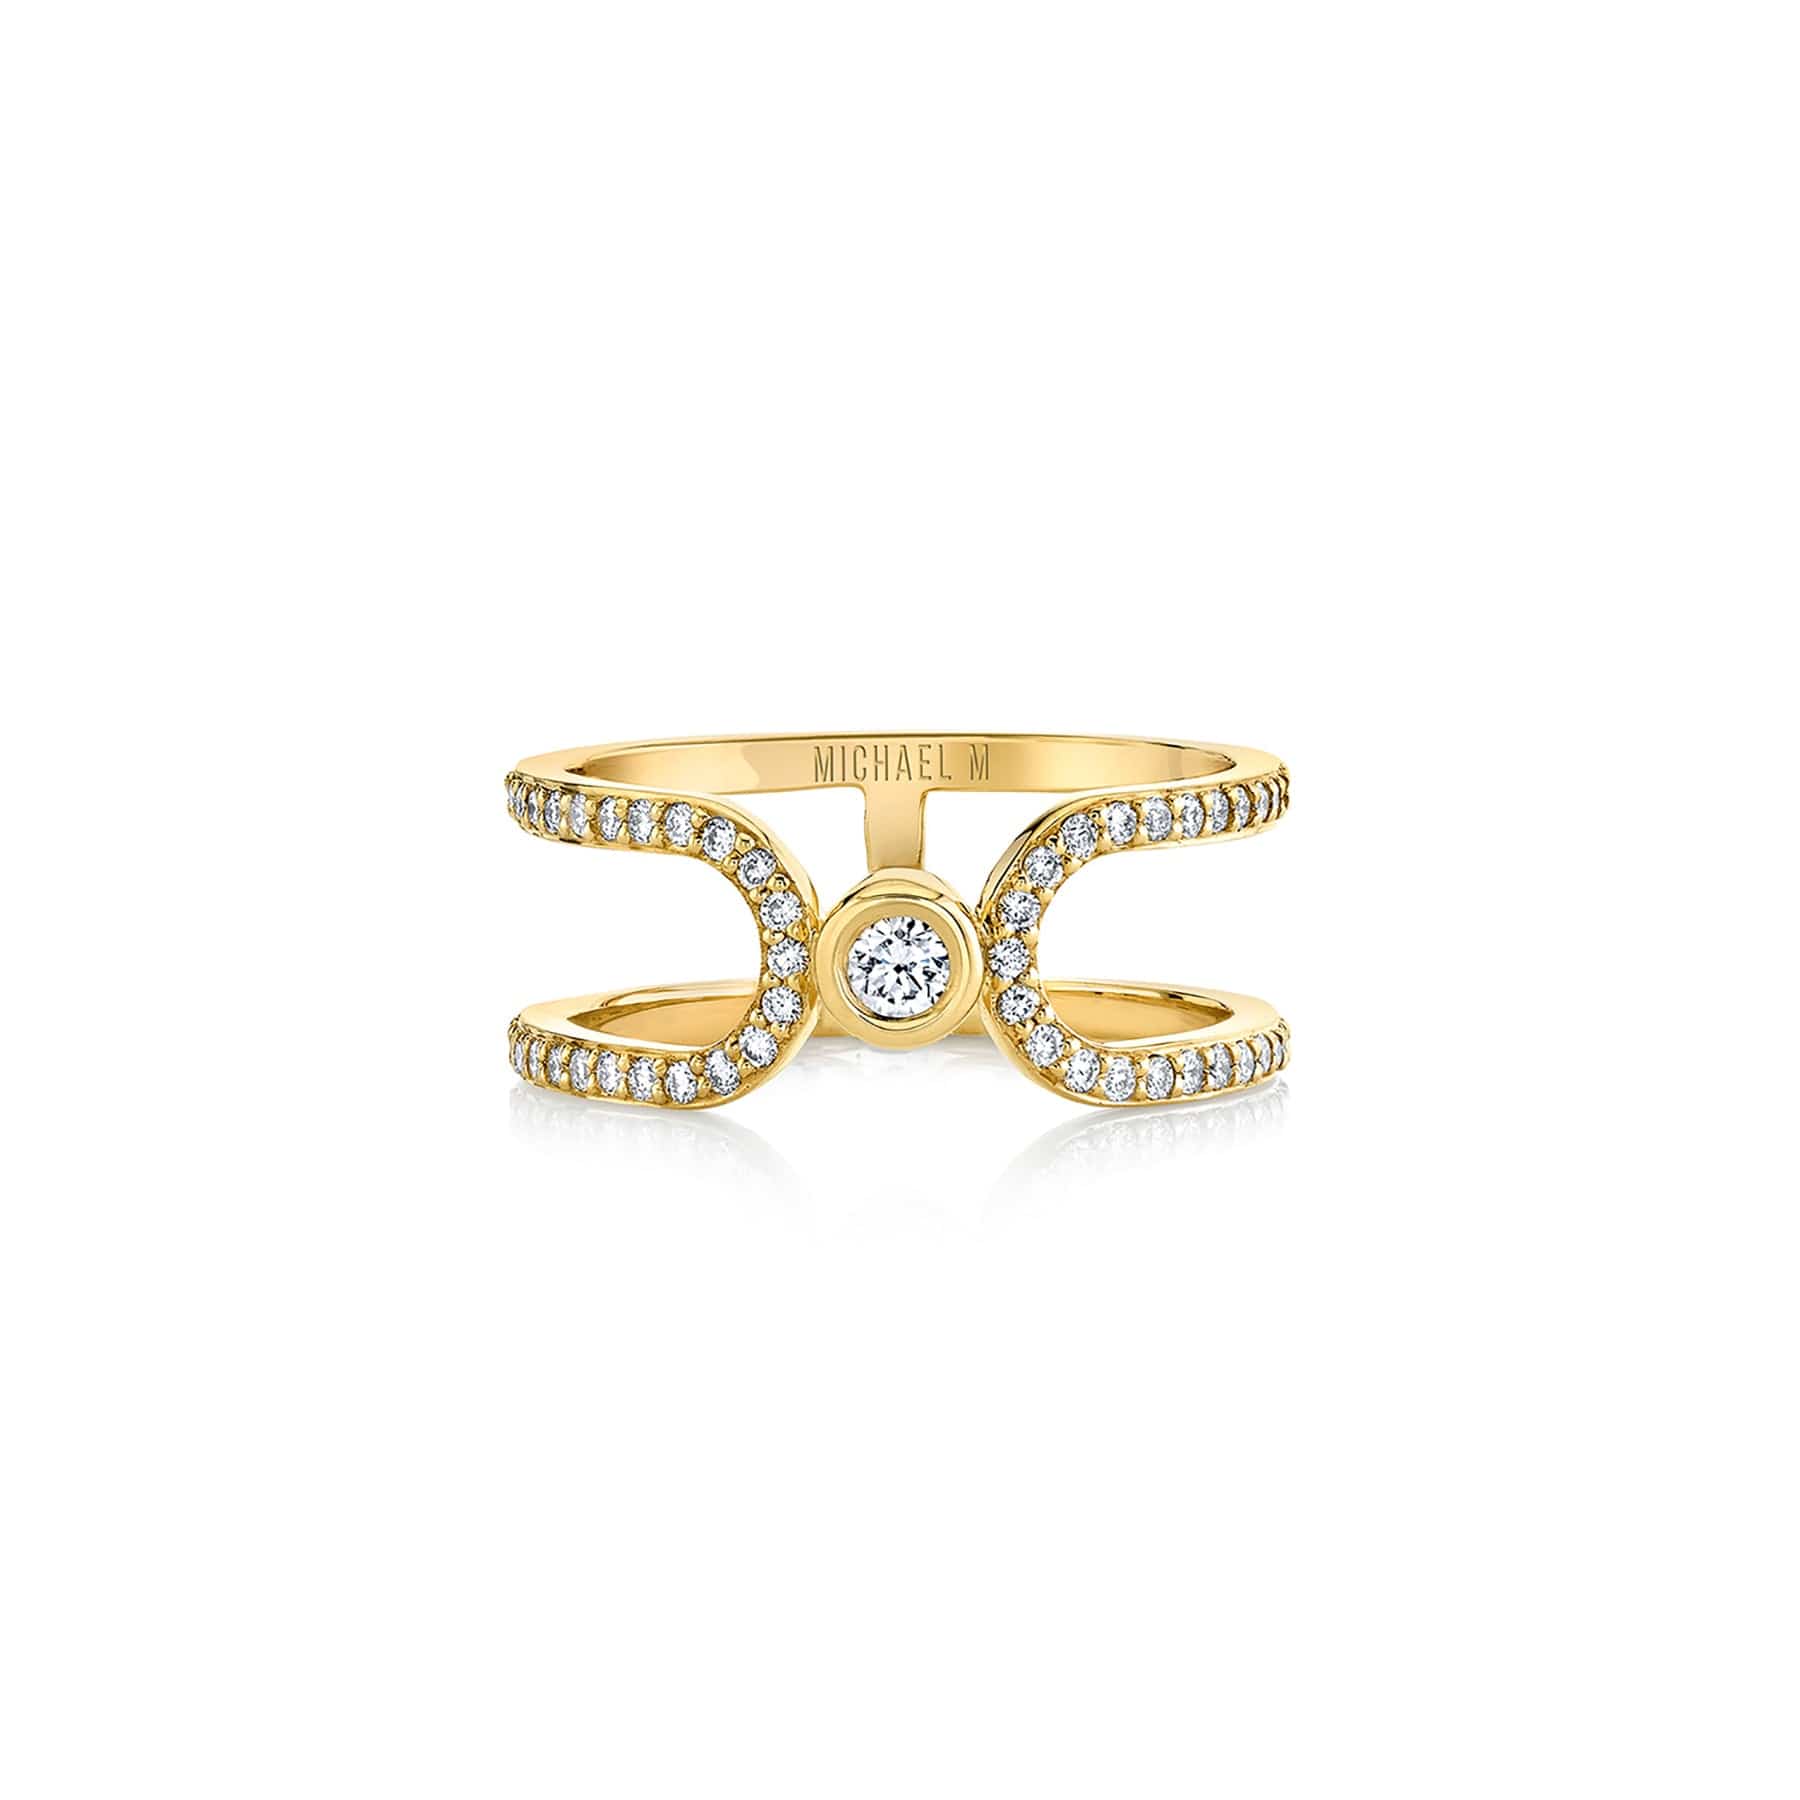 MICHAEL M Fashion Rings Pave Alignment Ring